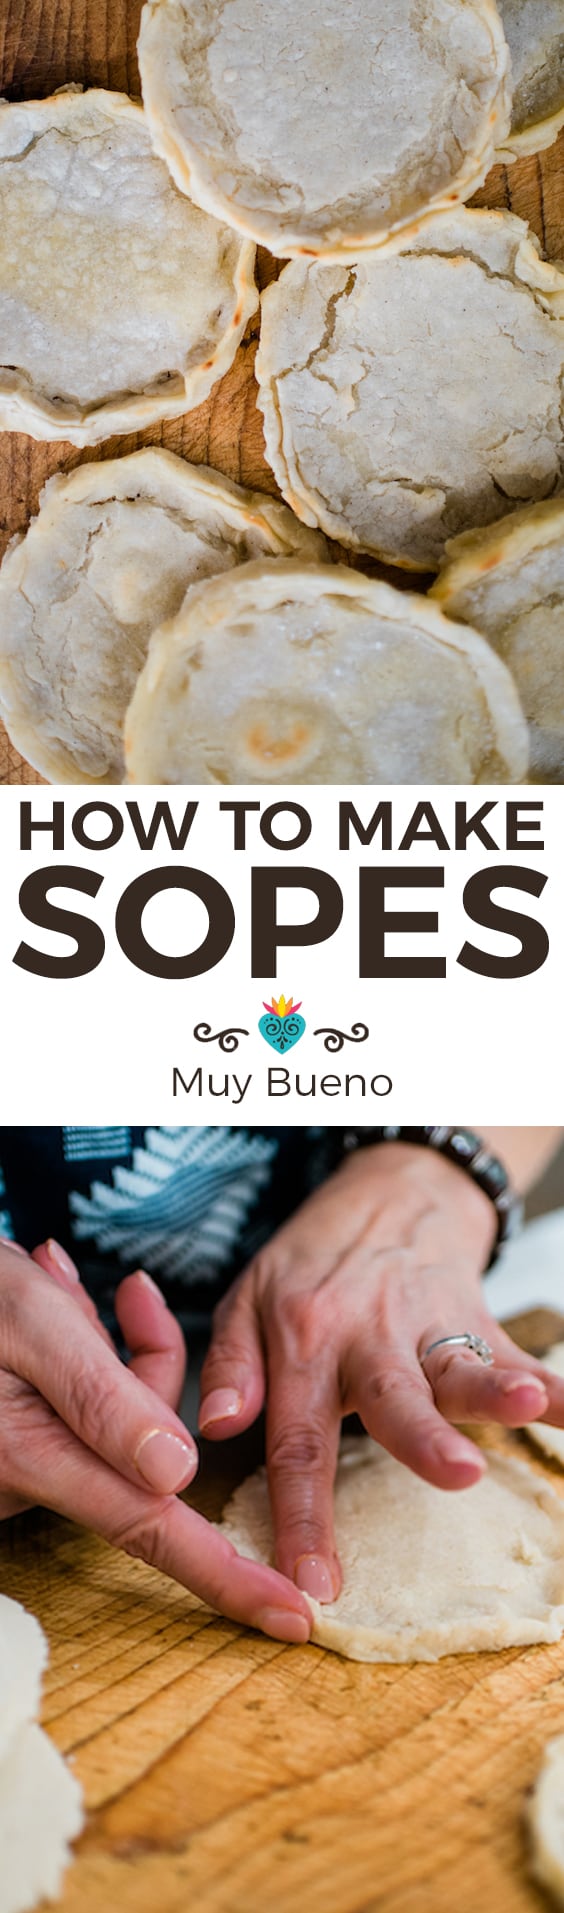 How to make sopes collage with text overlay